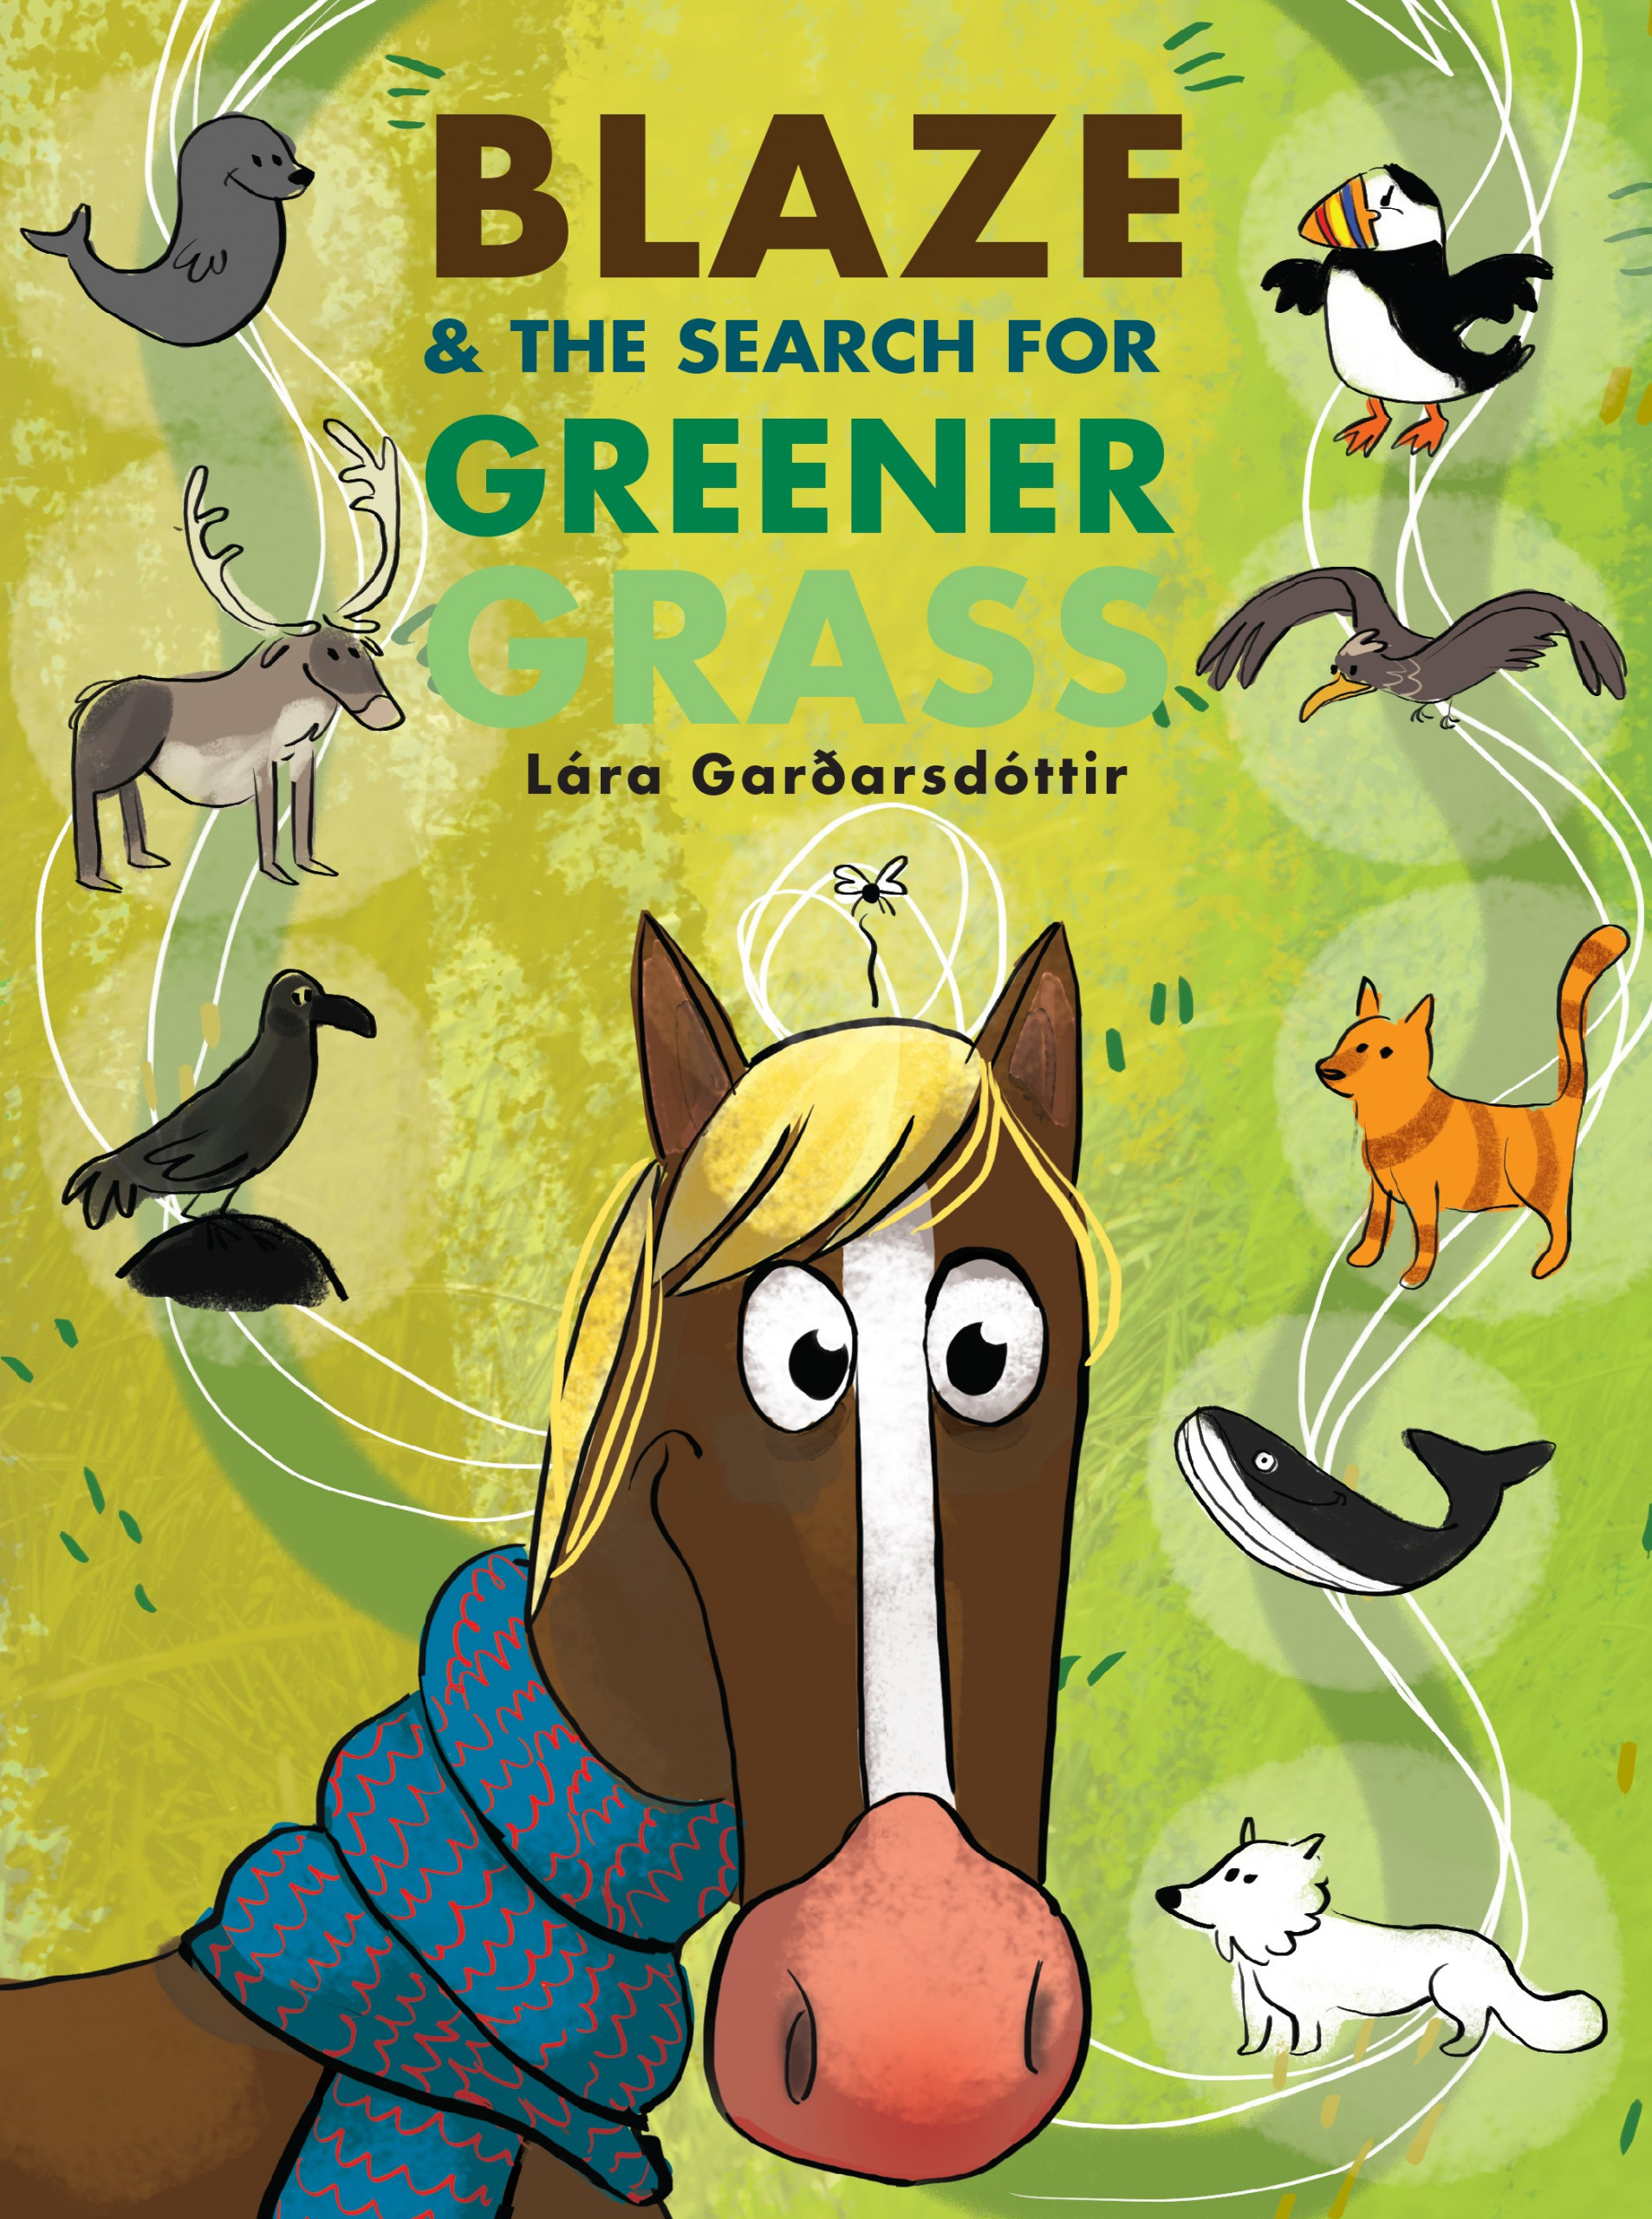 Blaze & the search for greener grass